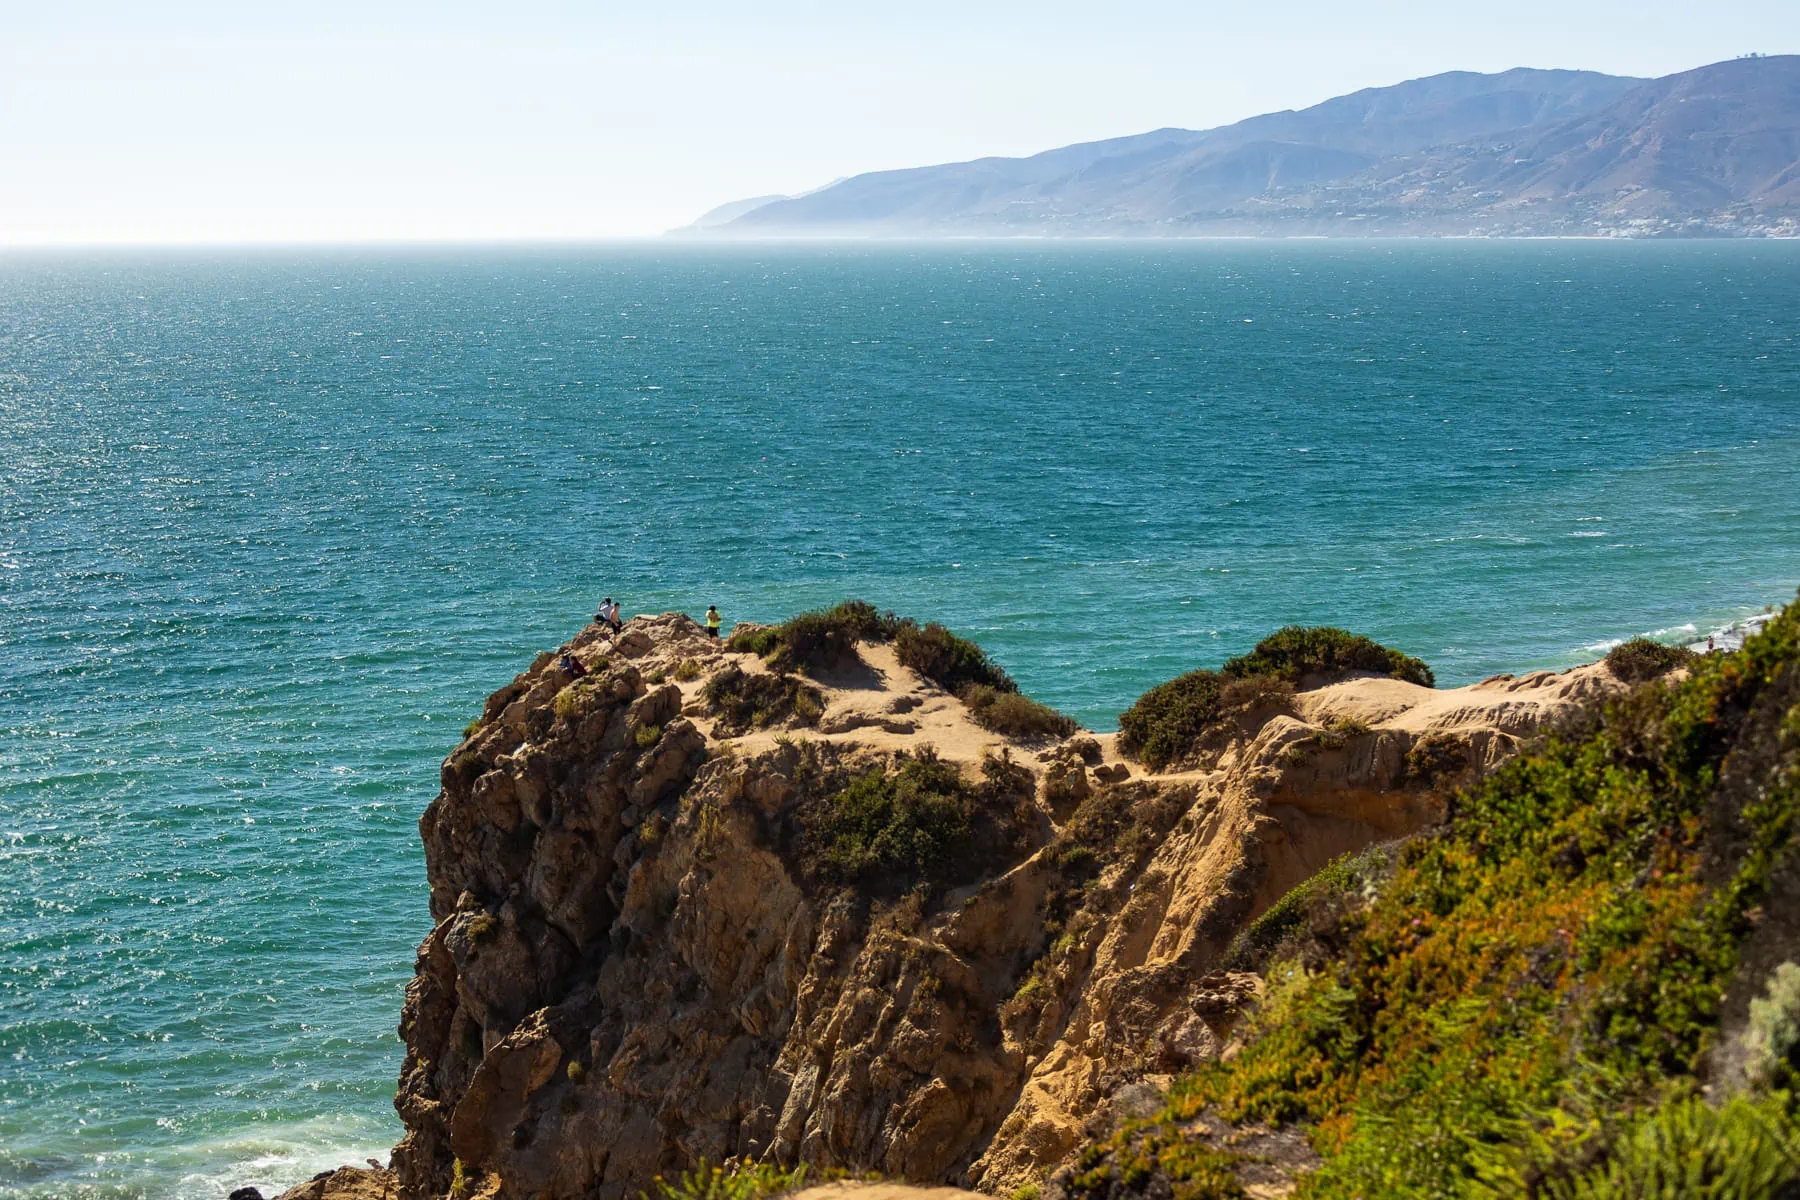 Point Dume elopement location on the southern California coast with sparkling teal water and colorful cliffs.